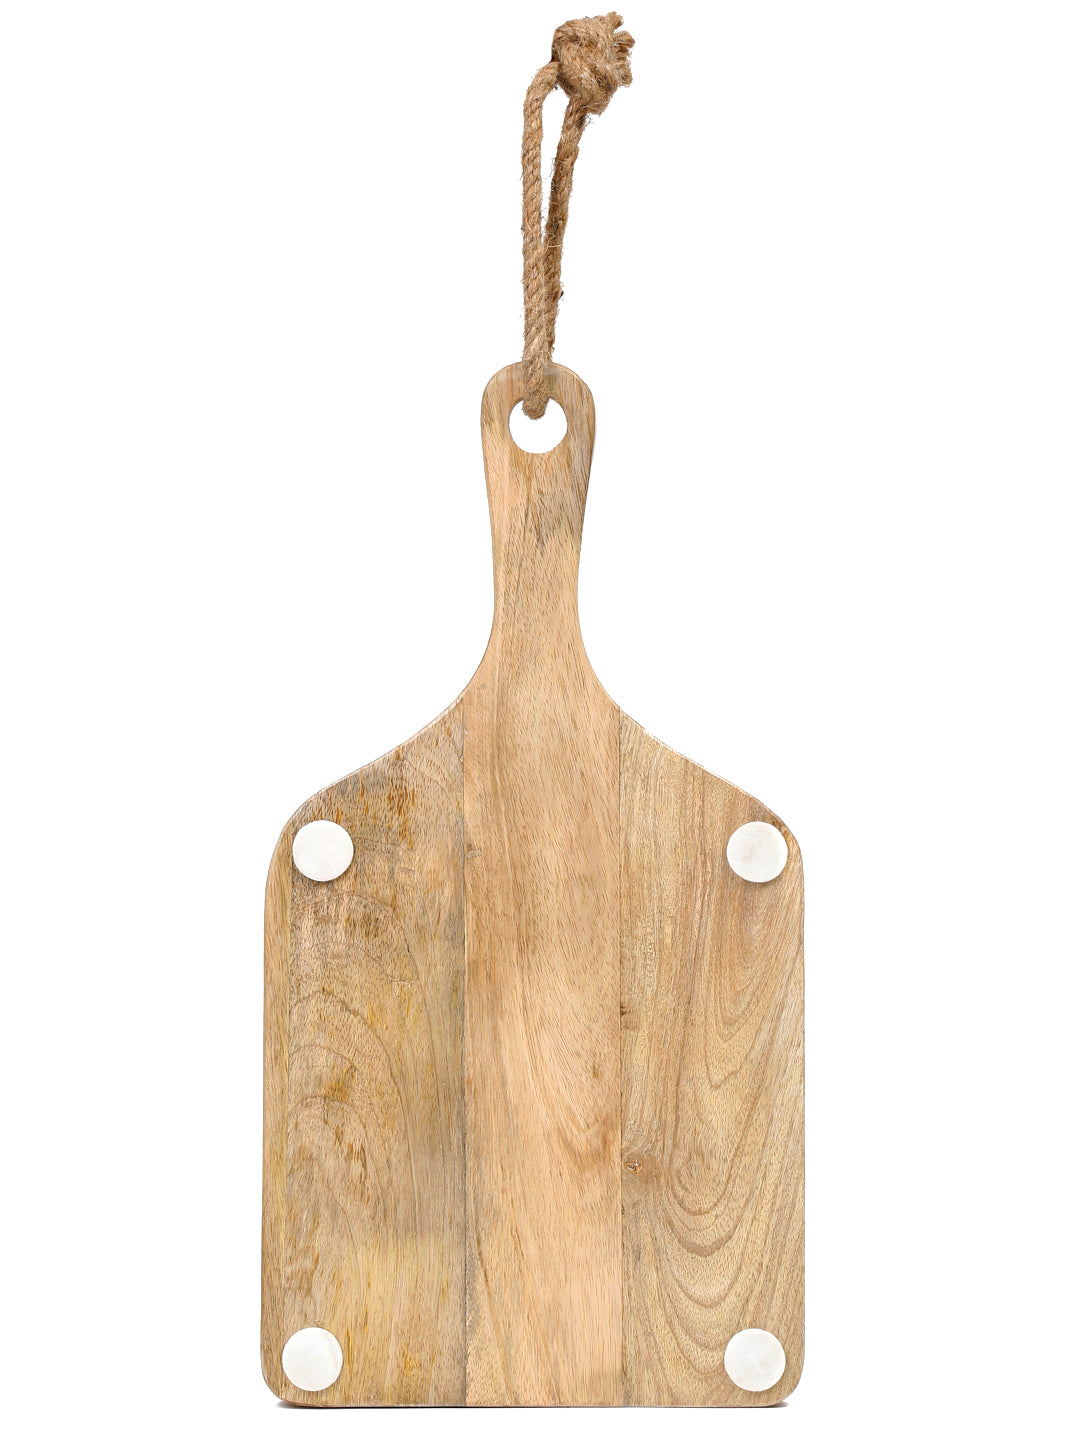 Stylish Wooden Chopping Board for Food Preparation